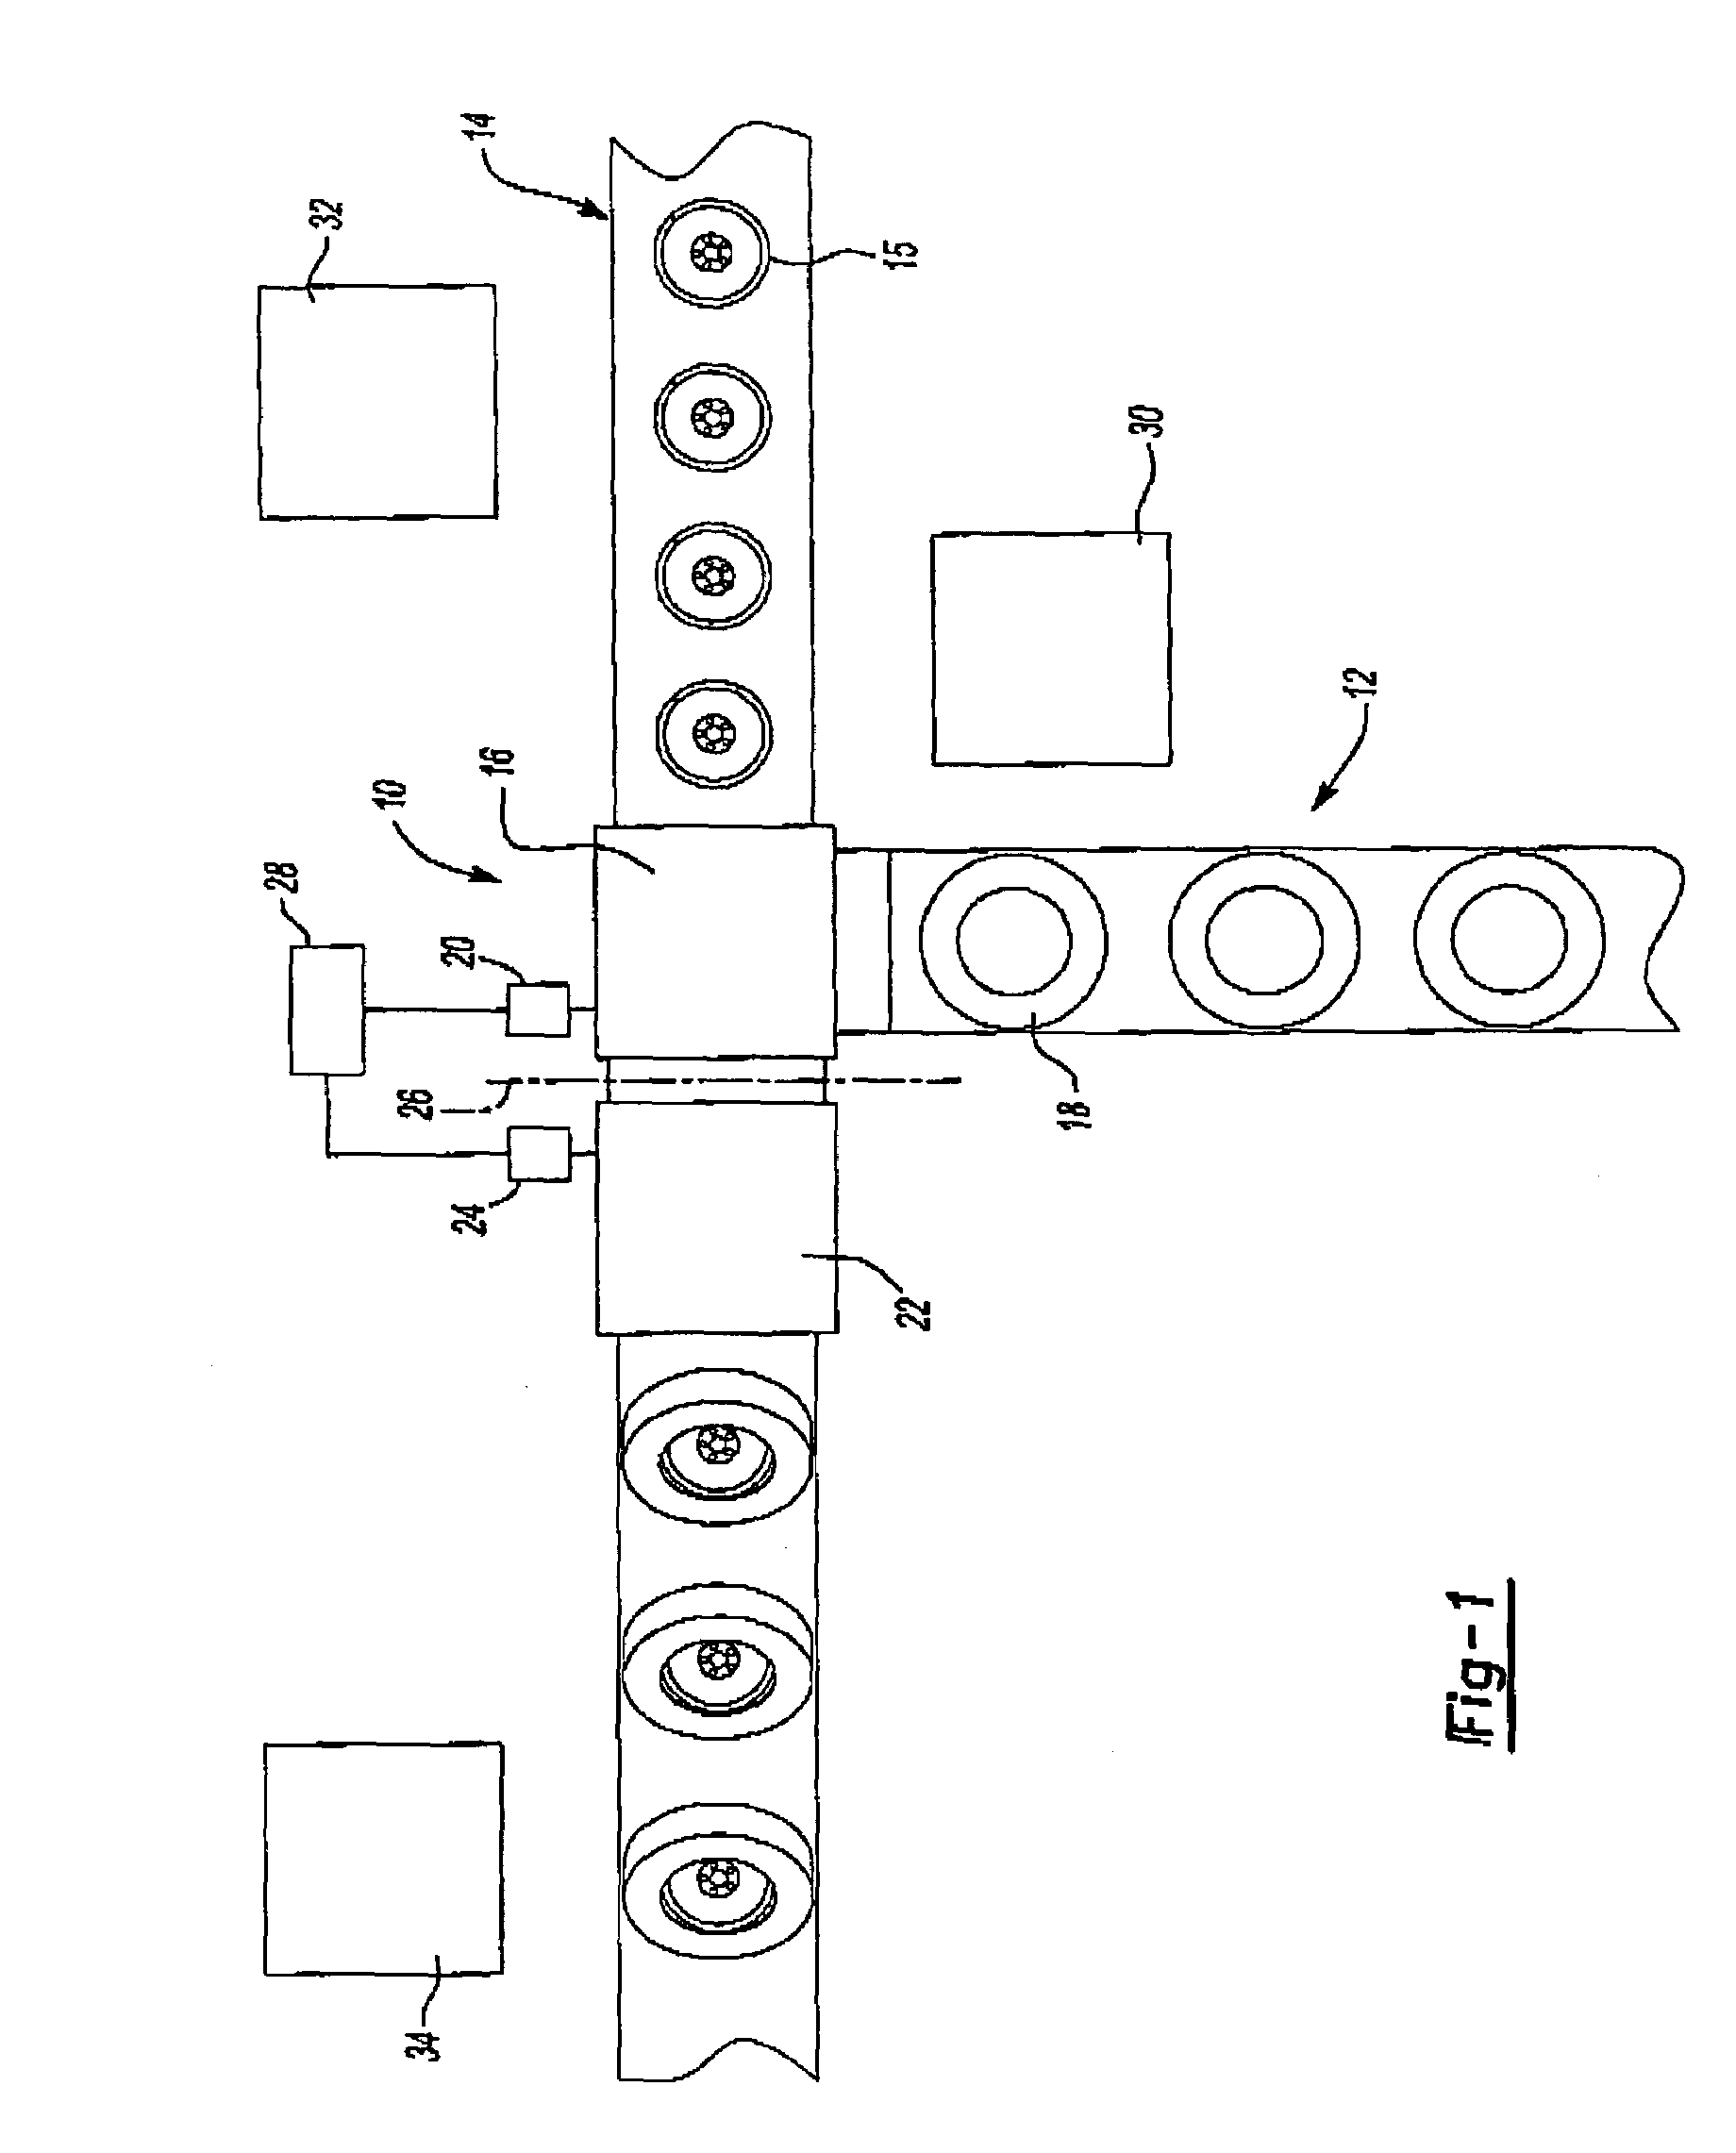 Vertical transfer device for tire assembly line